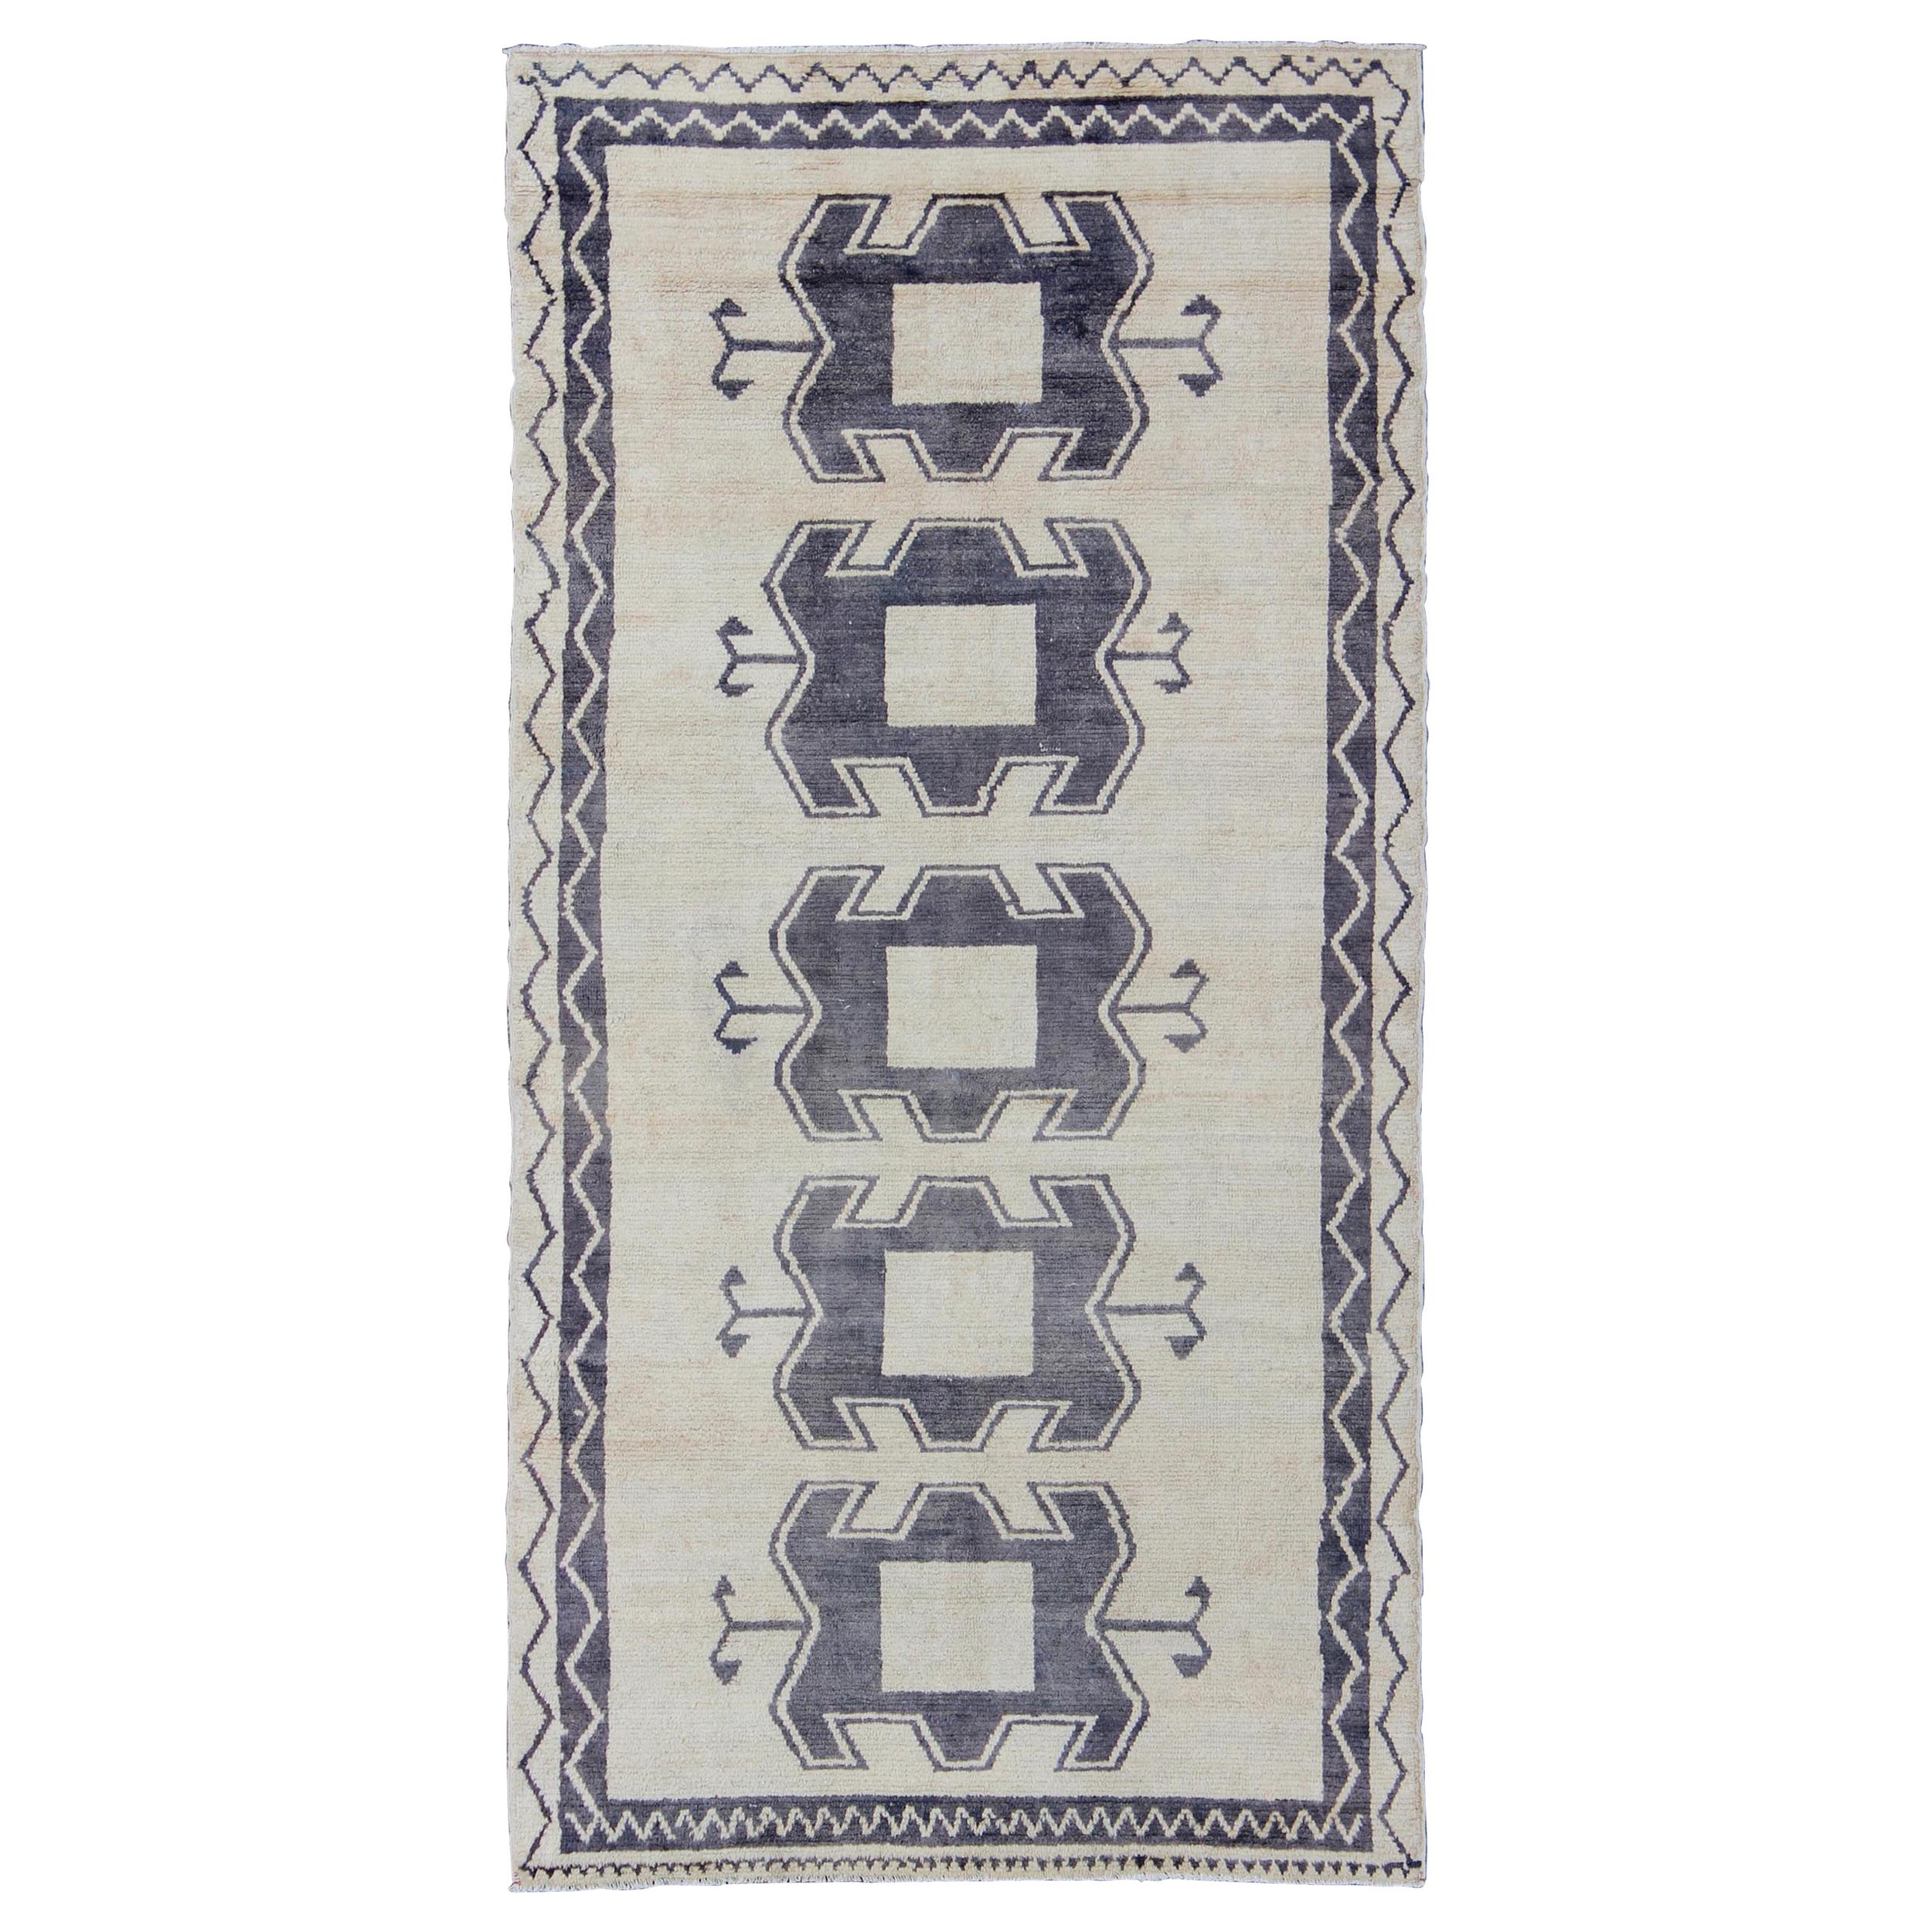 Midcentury Turkish Tulu Rug with Tribal Design in Purple/Gray and Cream  For Sale